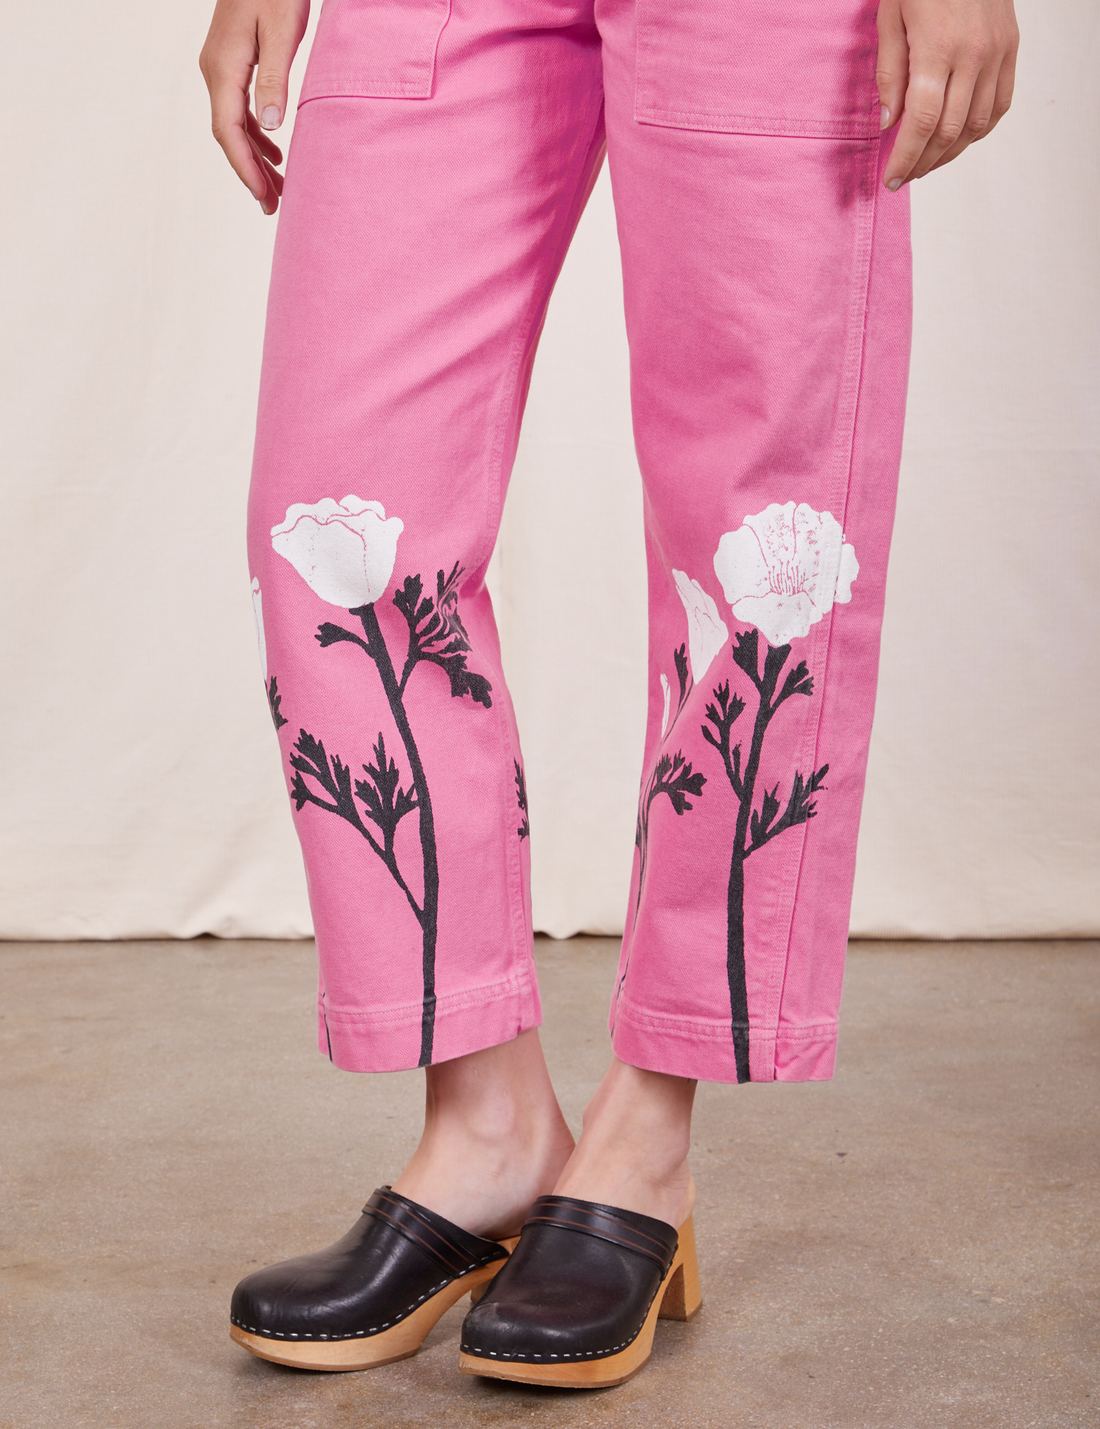 Pant leg close up of California Poppy Overalls in Bubblegum Pink. Paintstamped white poppies with black stems and leaves